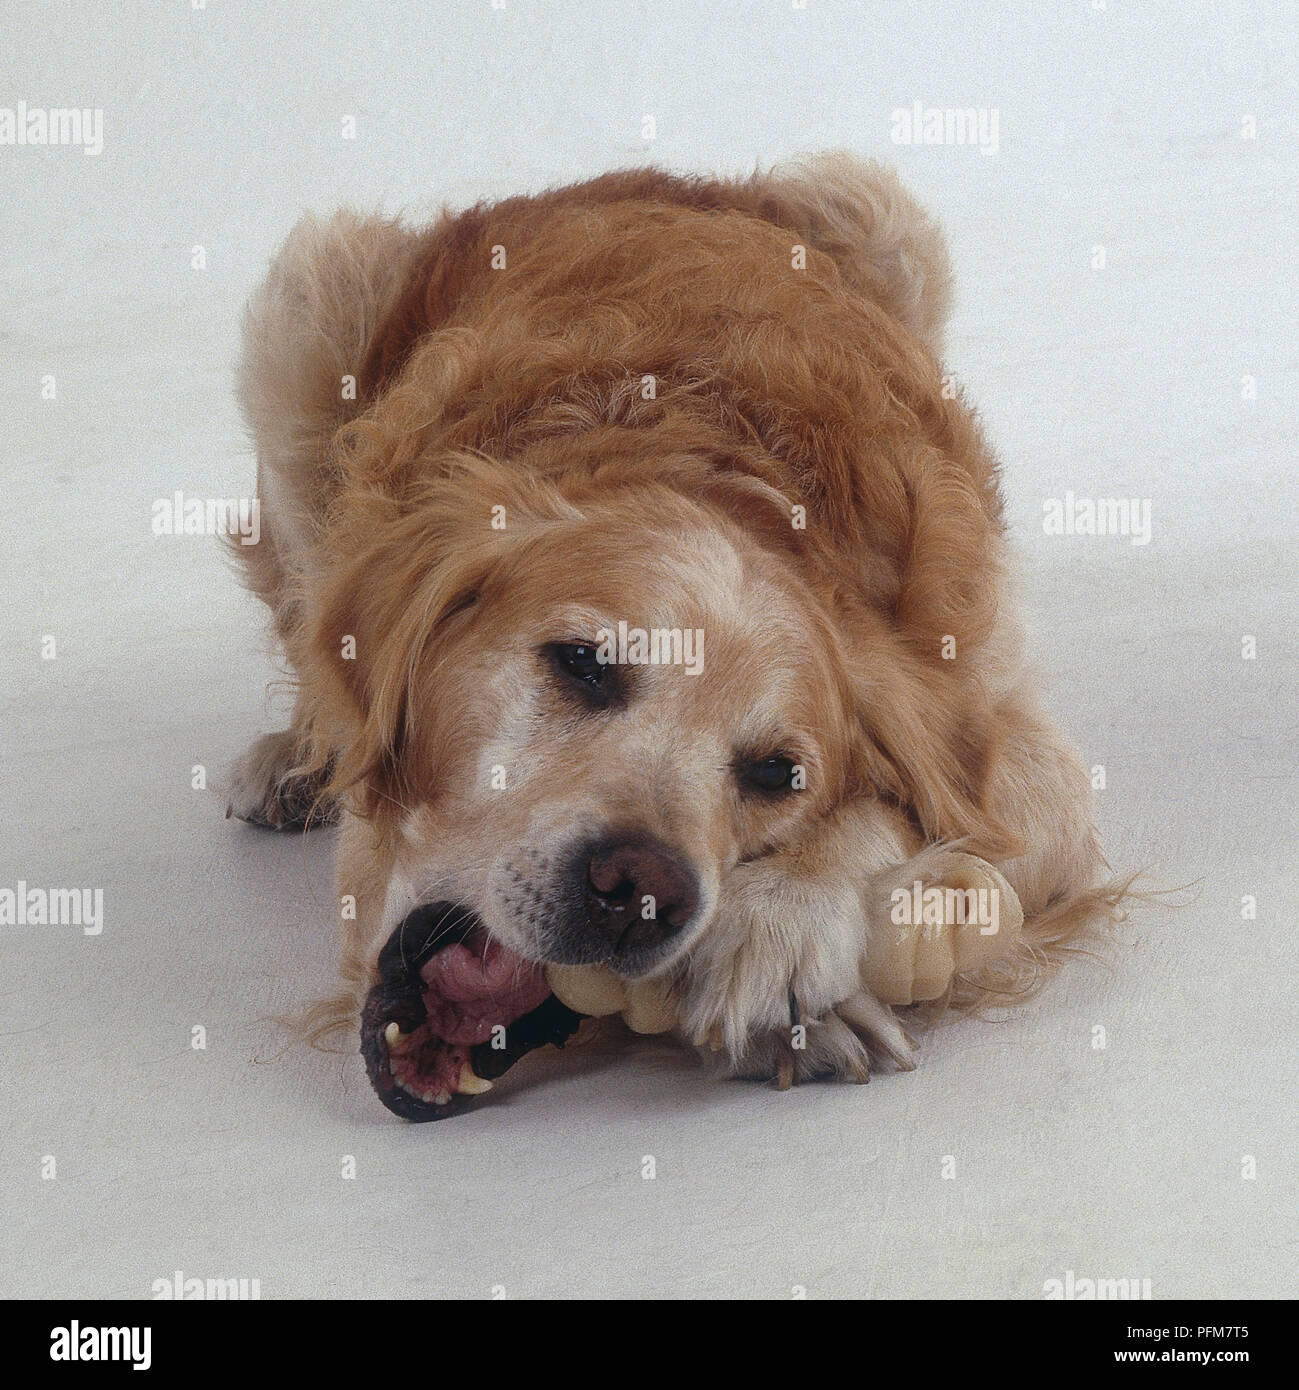 A dog with long reddish orange fur with white spots on its face chews on a toy while lying on the floor. Stock Photo